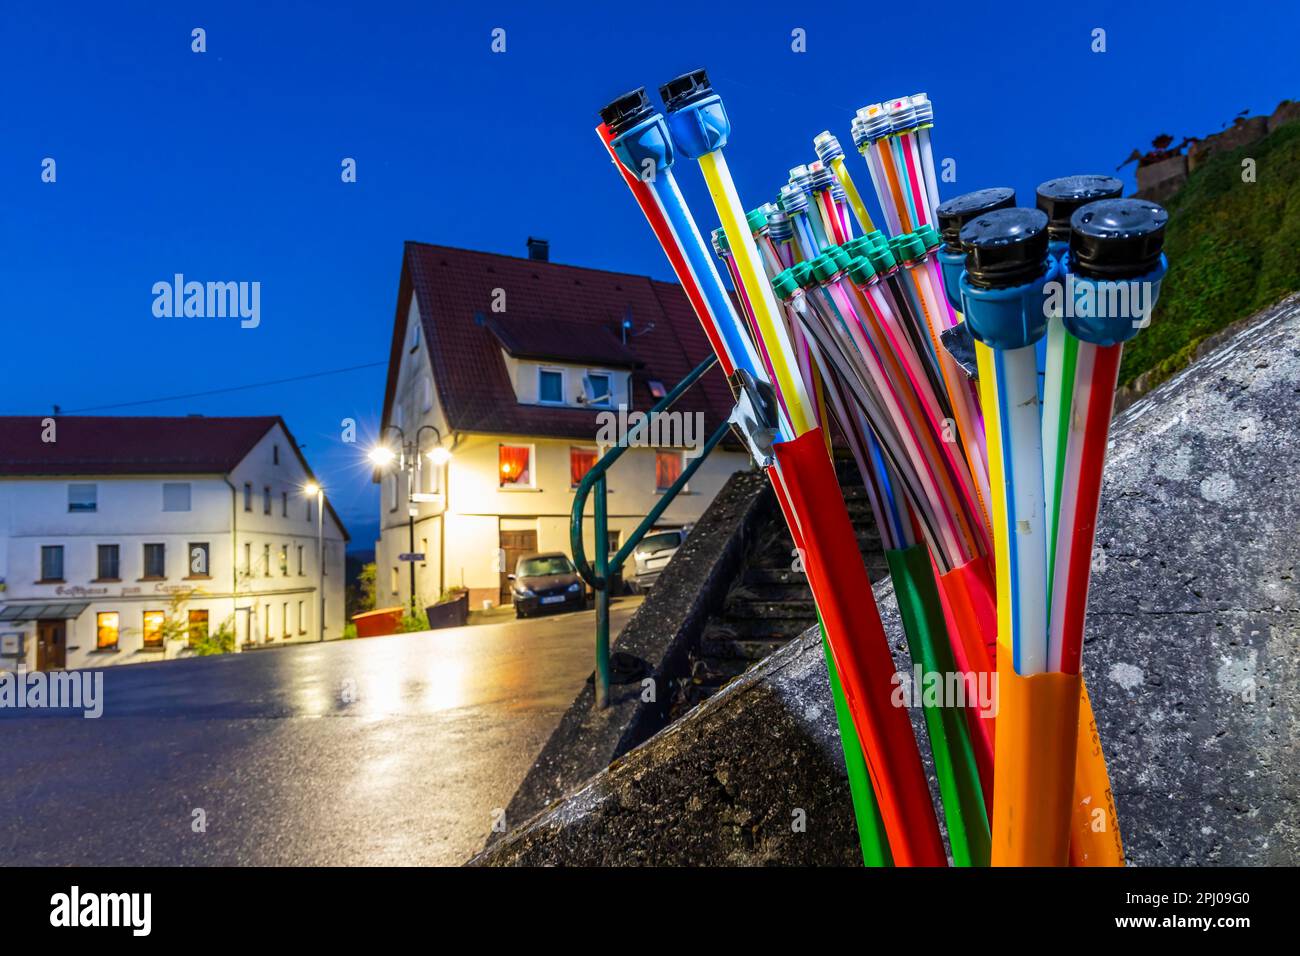 Broadband infrastructure, fast internet and communication through fibre optic cables, rural region, Muensingen, Baden-Wuerttemberg, Germany Stock Photo